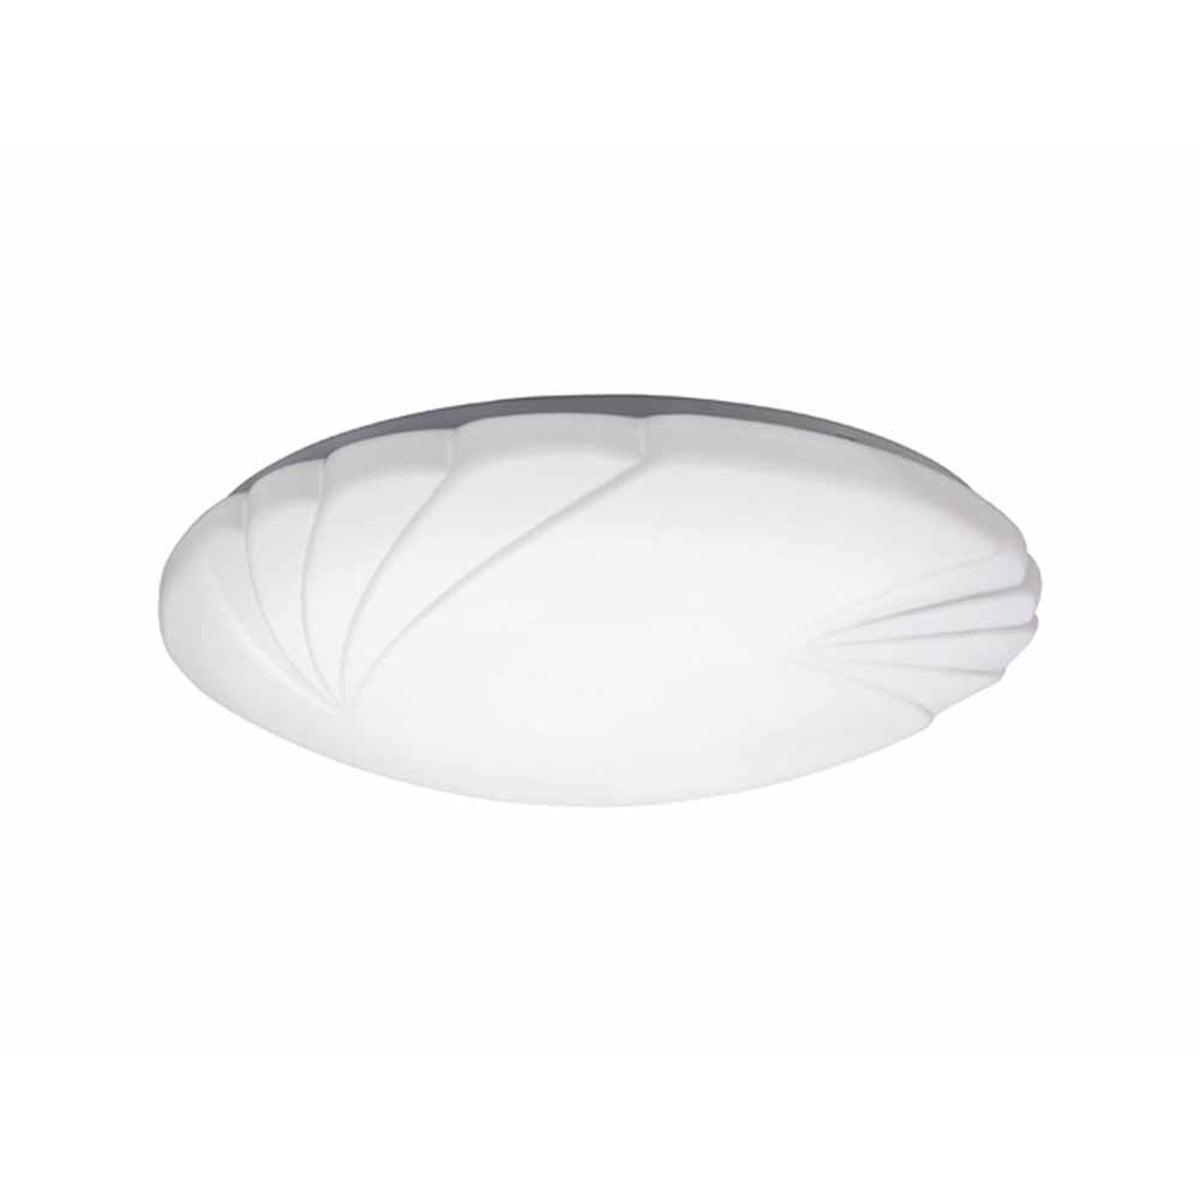 Crenelle 14 in. LED Ceiling Puff Light 3000K White finish